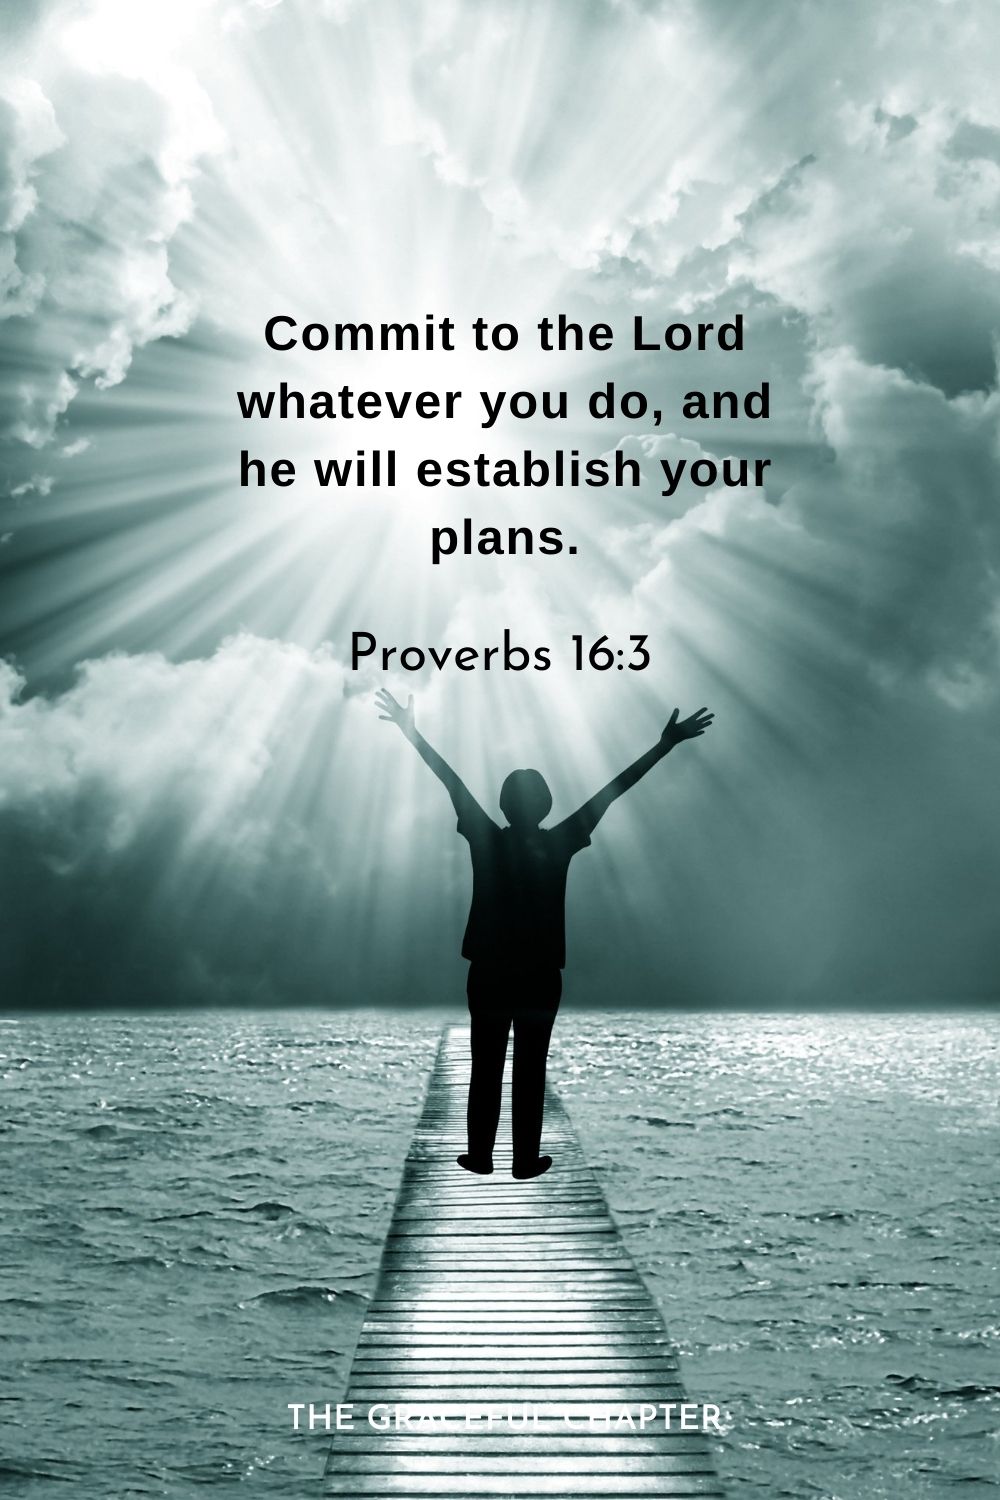 Commit to the Lord whatever you do, and he will establish your plans.